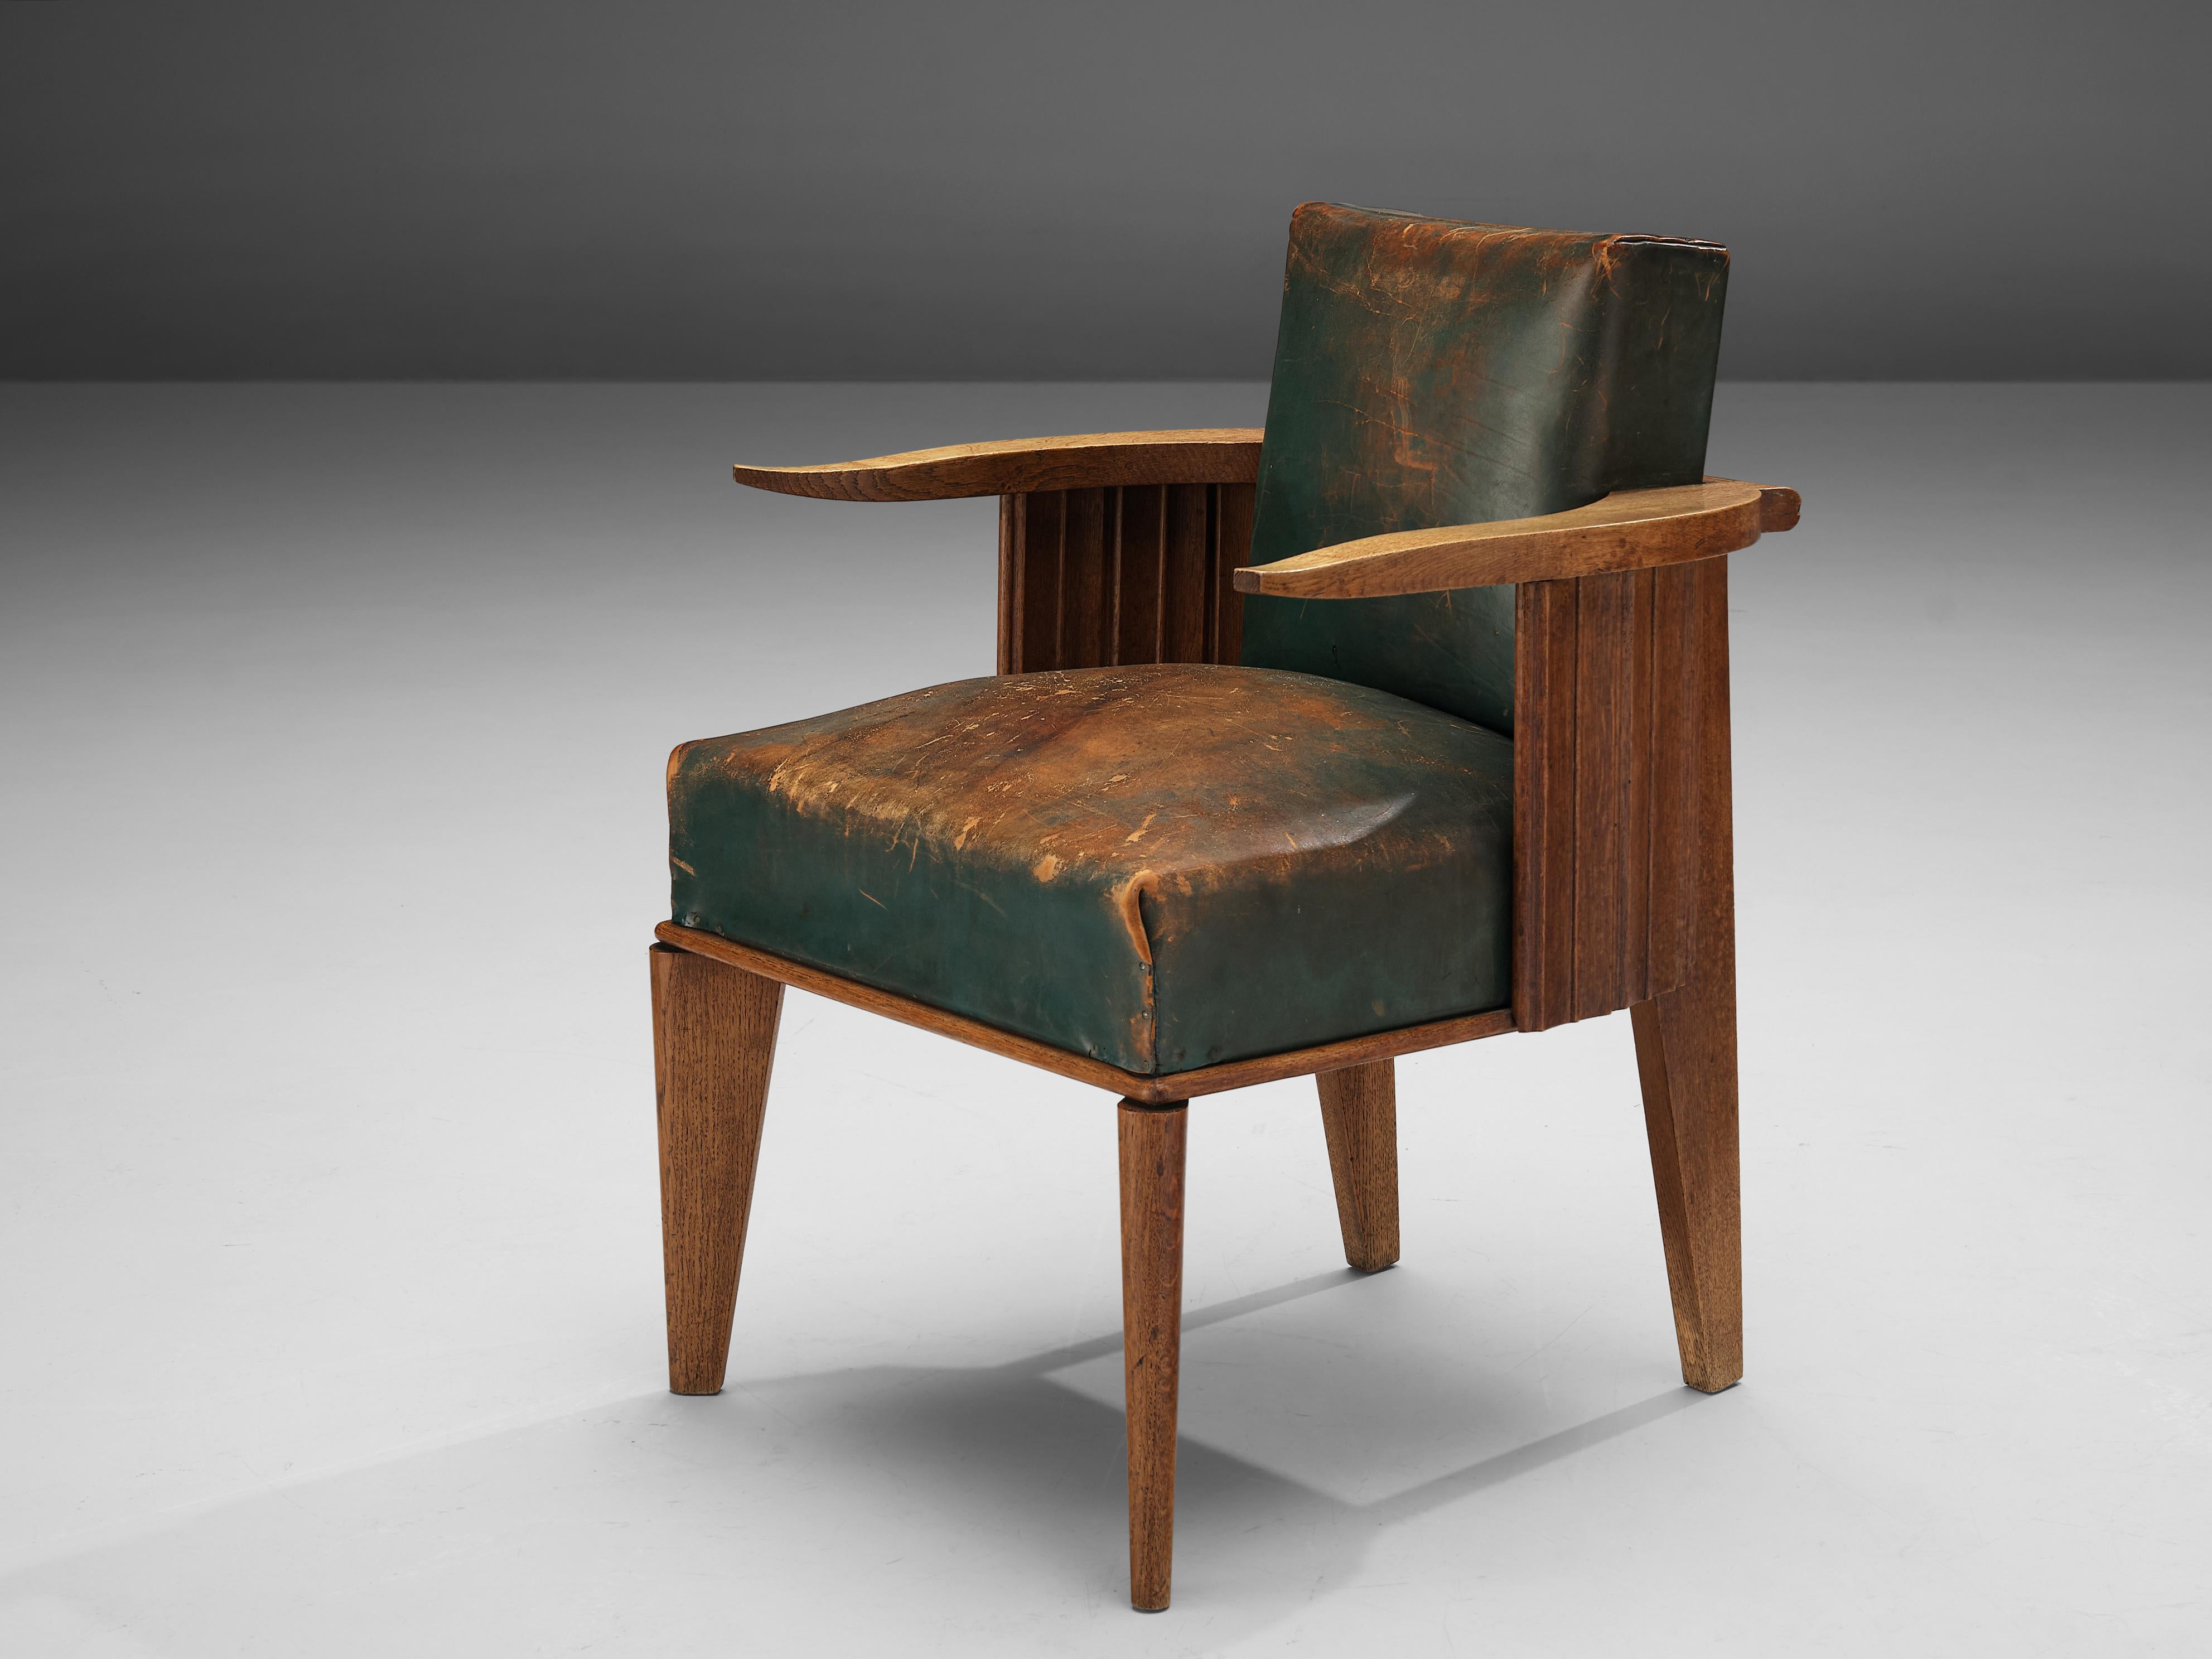 Easy chair, wood, patinated green leather, France, 1920s

This unique design features cow horn-shaped armrests, thick cushions and carved, closed sides. The two legs in the front of the chair are slightly turned to the side creating a dynamic